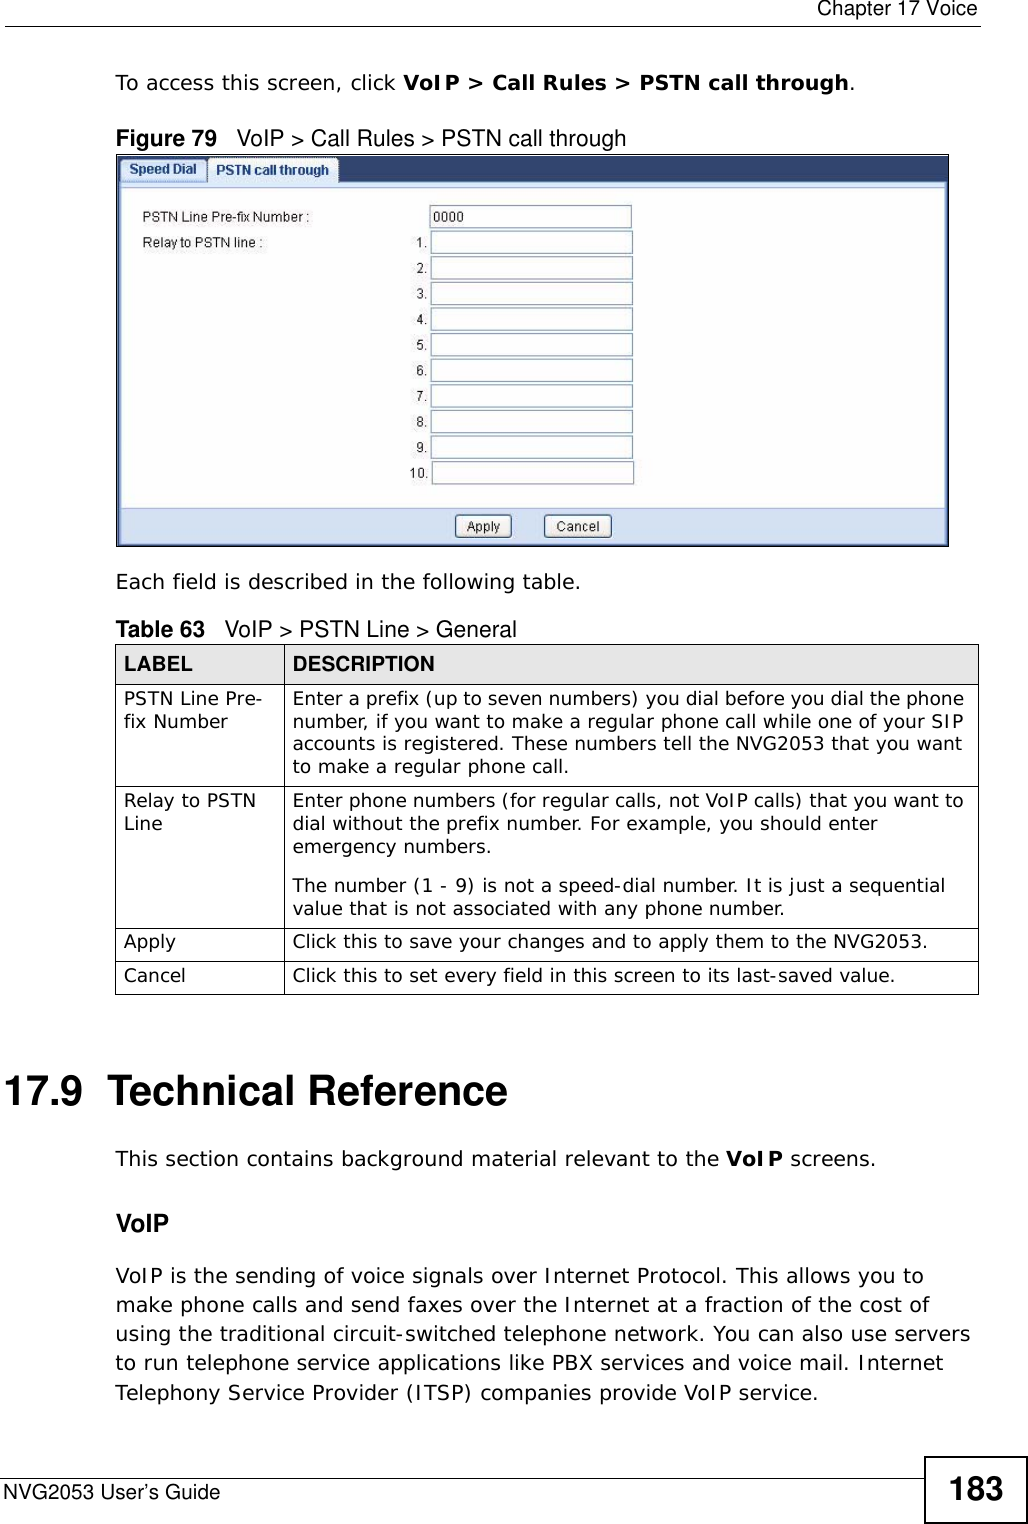  Chapter 17 VoiceNVG2053 User’s Guide 183To access this screen, click VoIP &gt; Call Rules &gt; PSTN call through.Figure 79   VoIP &gt; Call Rules &gt; PSTN call throughEach field is described in the following table.17.9  Technical ReferenceThis section contains background material relevant to the VoIP screens.VoIP VoIP is the sending of voice signals over Internet Protocol. This allows you to make phone calls and send faxes over the Internet at a fraction of the cost of using the traditional circuit-switched telephone network. You can also use servers to run telephone service applications like PBX services and voice mail. Internet Telephony Service Provider (ITSP) companies provide VoIP service. Table 63   VoIP &gt; PSTN Line &gt; GeneralLABEL DESCRIPTIONPSTN Line Pre-fix Number Enter a prefix (up to seven numbers) you dial before you dial the phone number, if you want to make a regular phone call while one of your SIP accounts is registered. These numbers tell the NVG2053 that you want to make a regular phone call.Relay to PSTN Line Enter phone numbers (for regular calls, not VoIP calls) that you want to dial without the prefix number. For example, you should enter emergency numbers.The number (1 - 9) is not a speed-dial number. It is just a sequential value that is not associated with any phone number.Apply Click this to save your changes and to apply them to the NVG2053.Cancel Click this to set every field in this screen to its last-saved value.